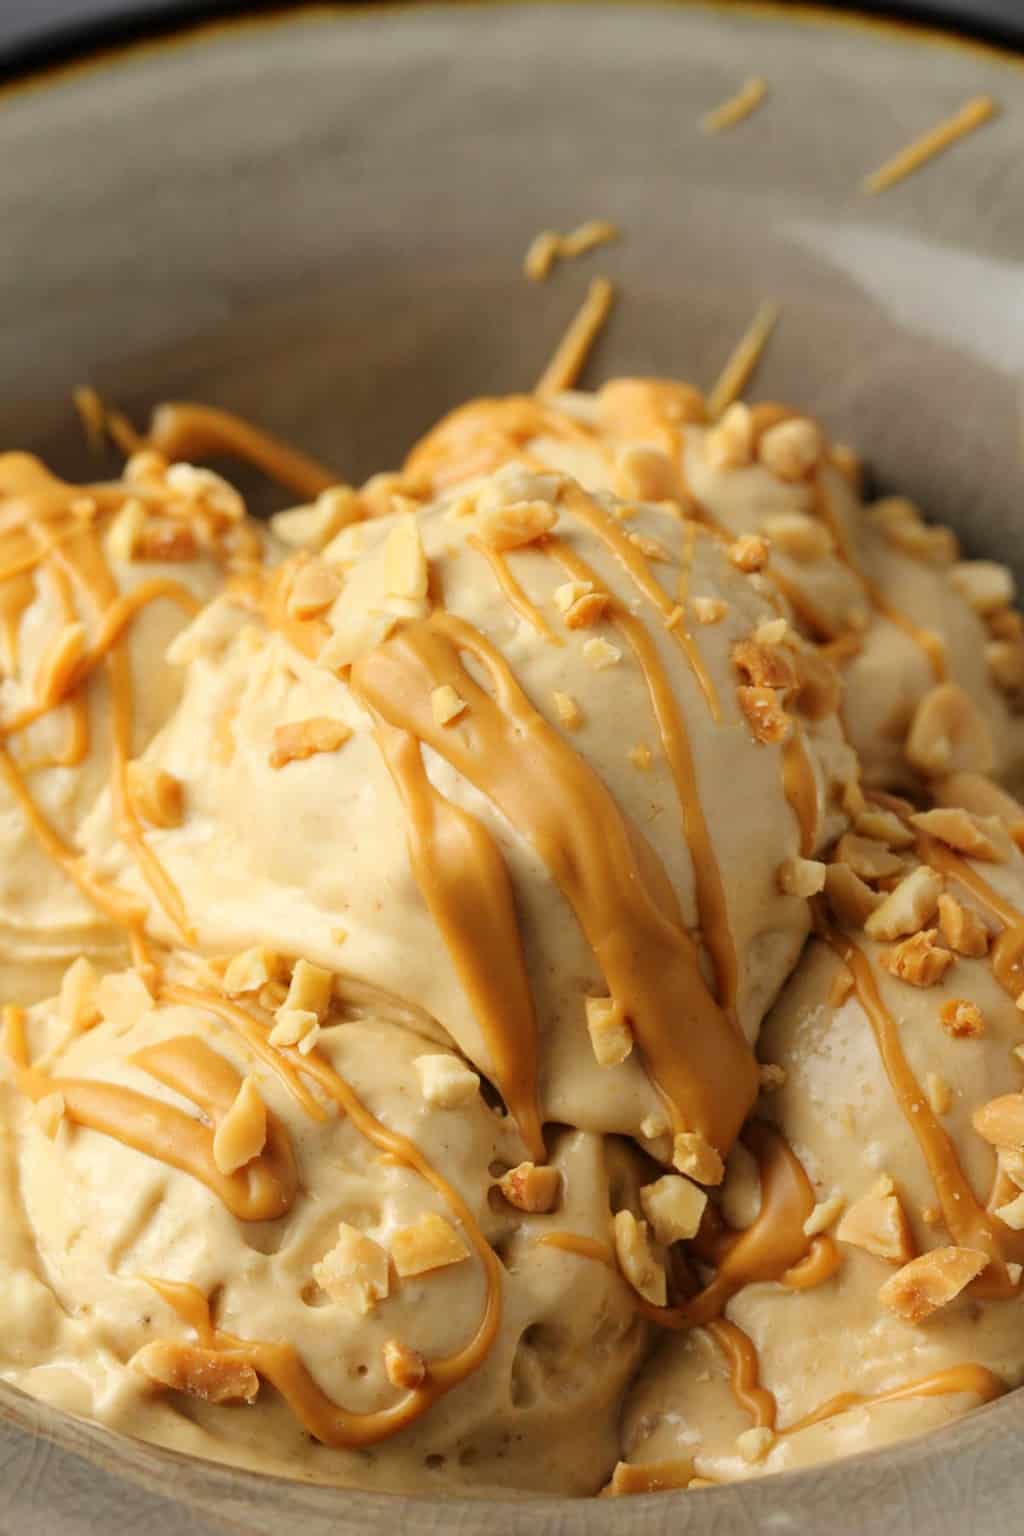 Peanut Butter & Banana Ice Cream - Cooking With Carlee